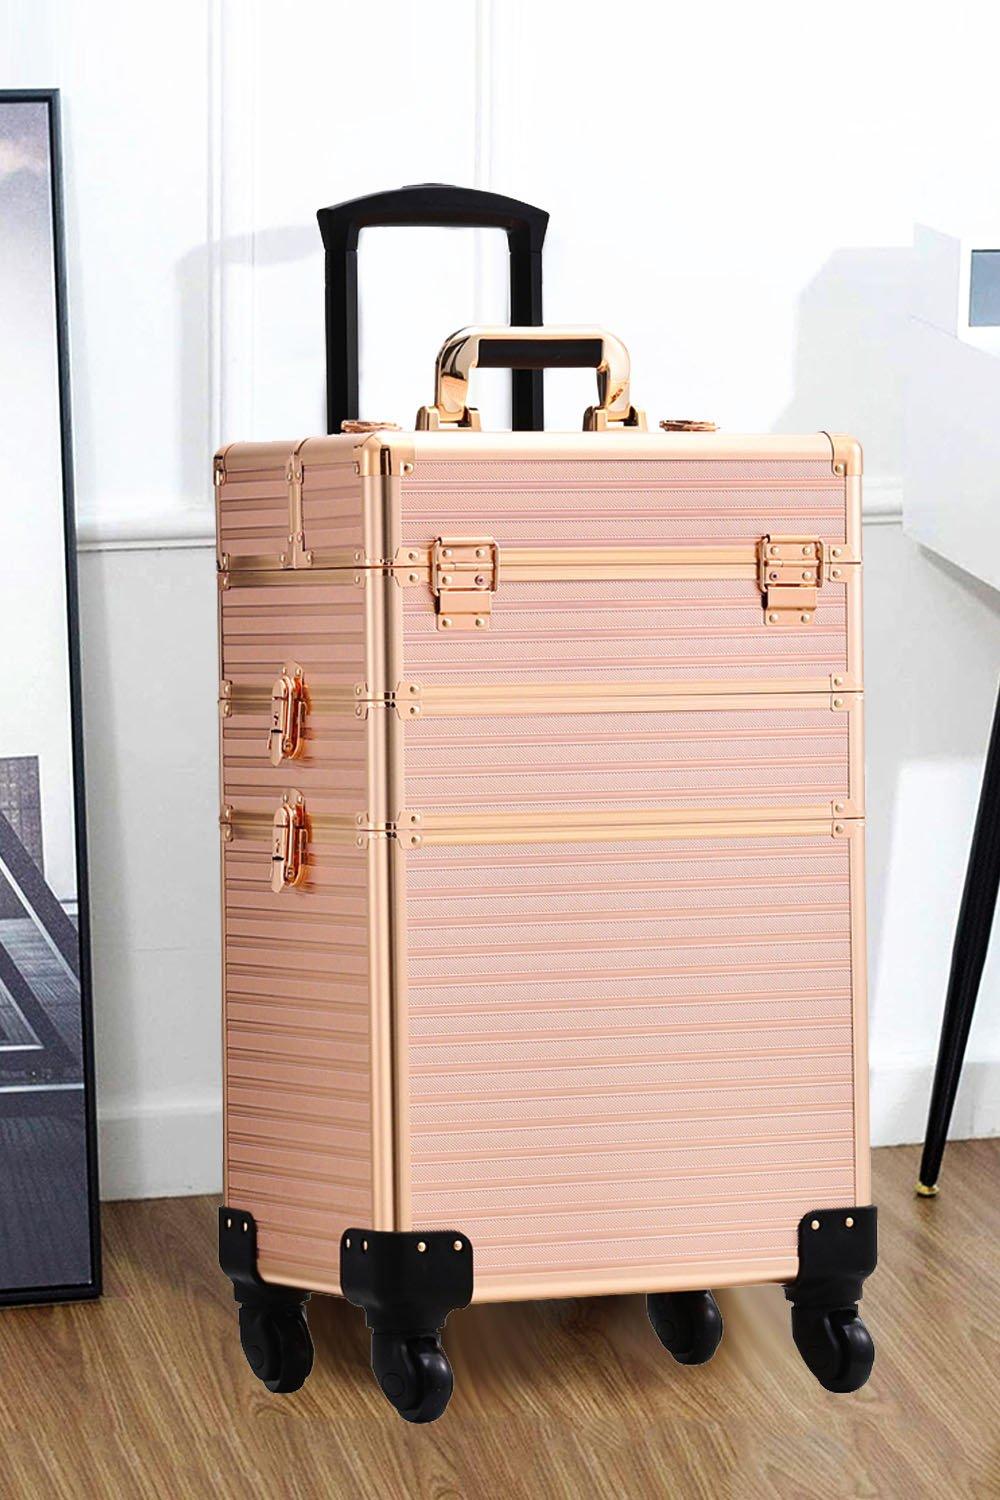 3 in 1 Removable Cosmetic Makeup Train Case Rose Gold